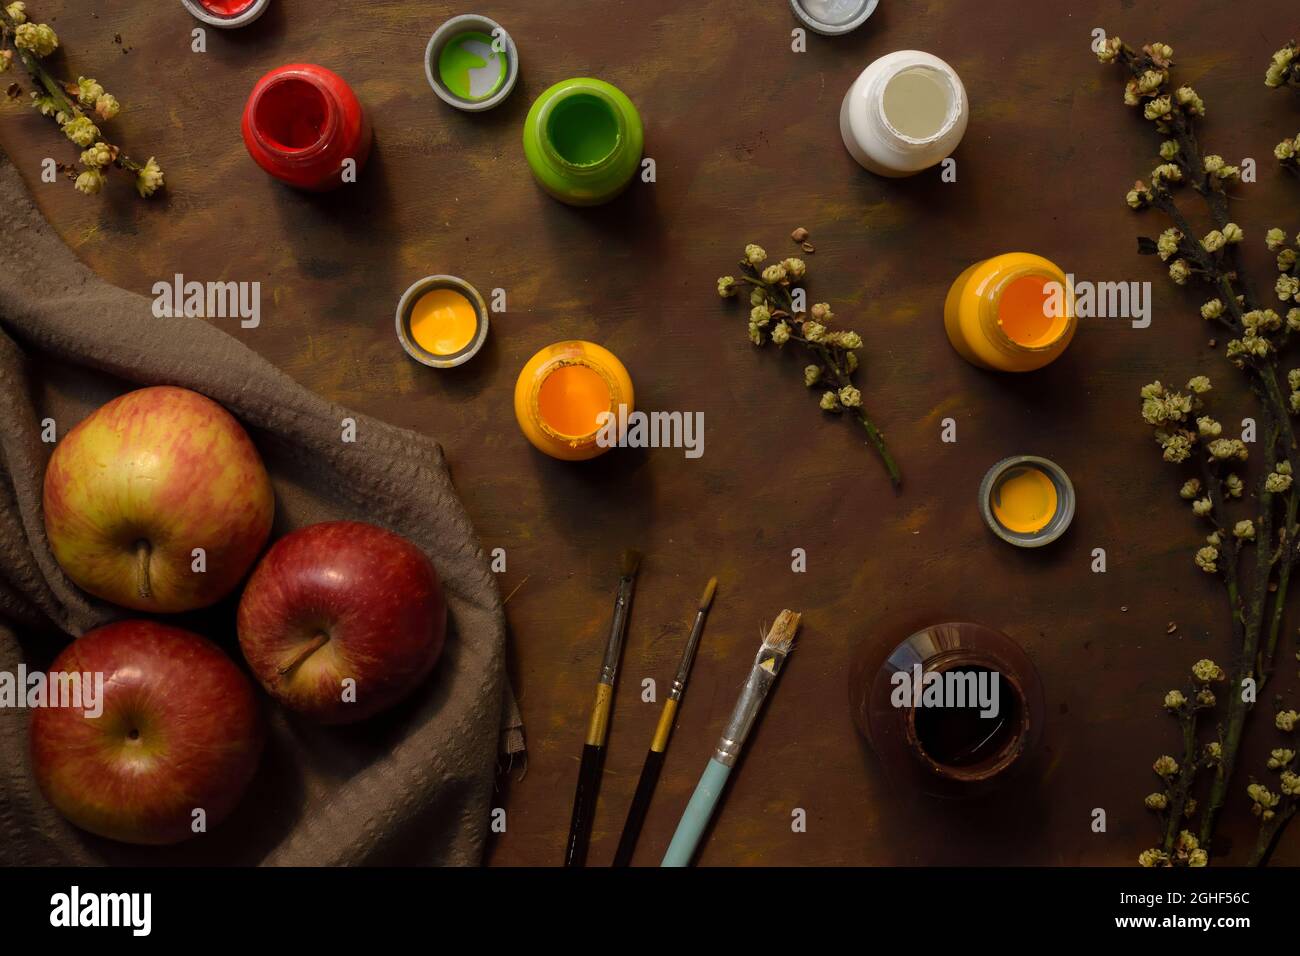 brushes and paints for realistic still life illustration Stock Photo